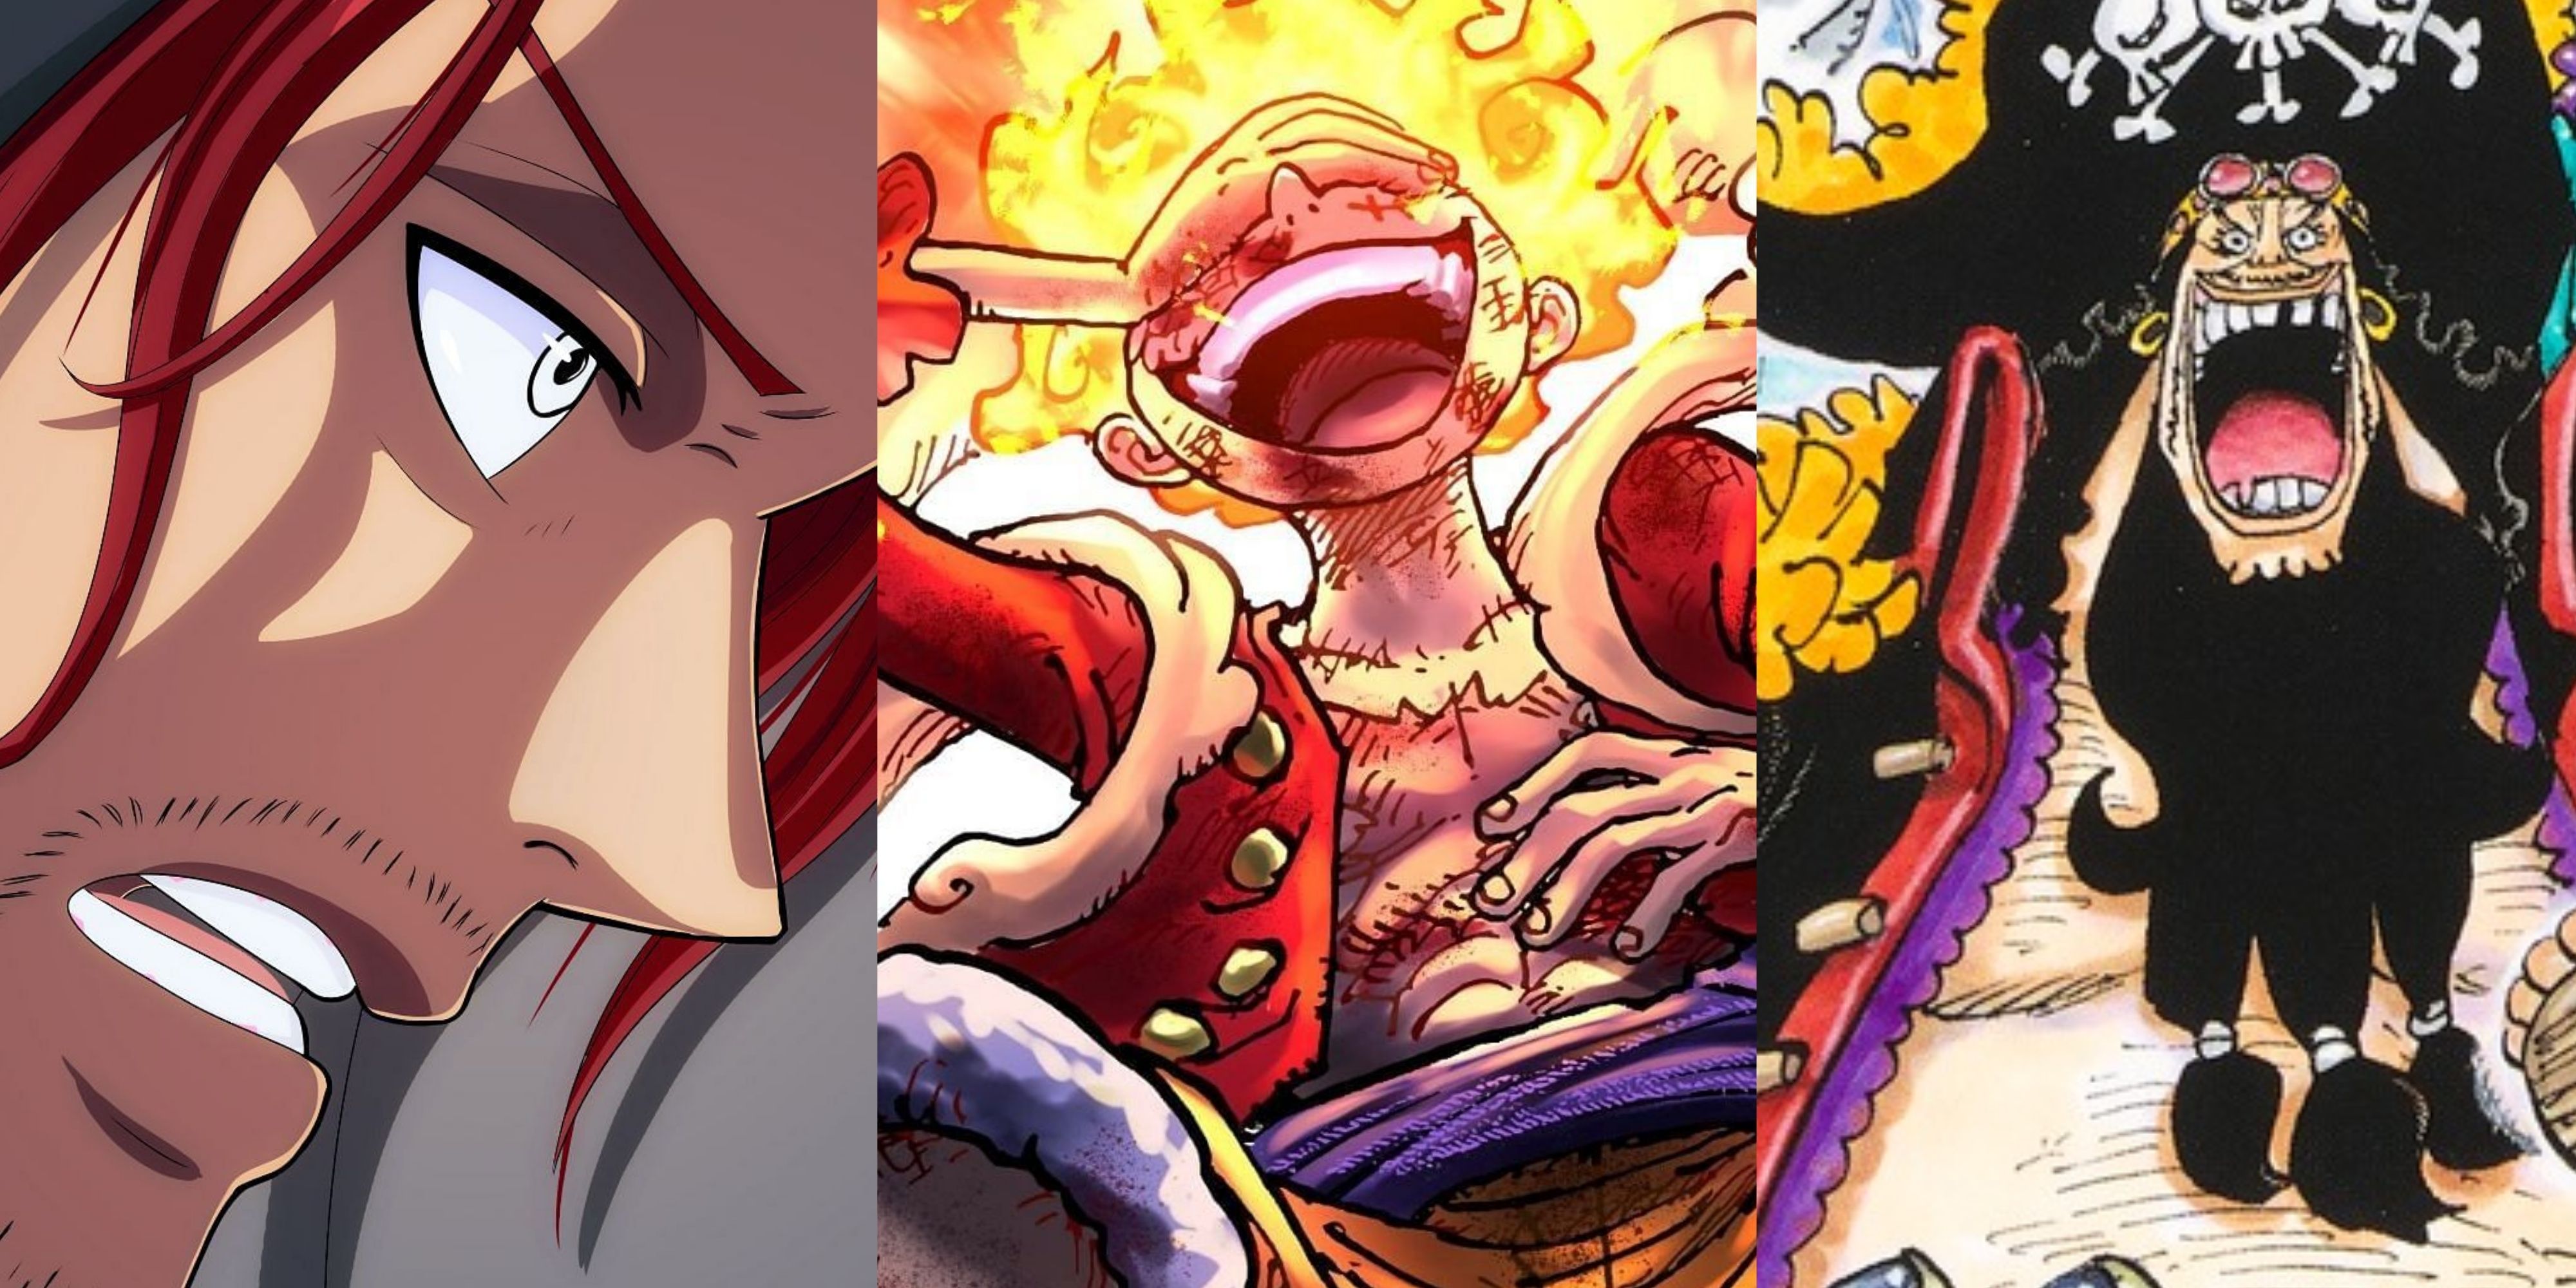 Featured One Piece Characters Luffy Will Fight After Wano Shanks Blackbeard Luffy